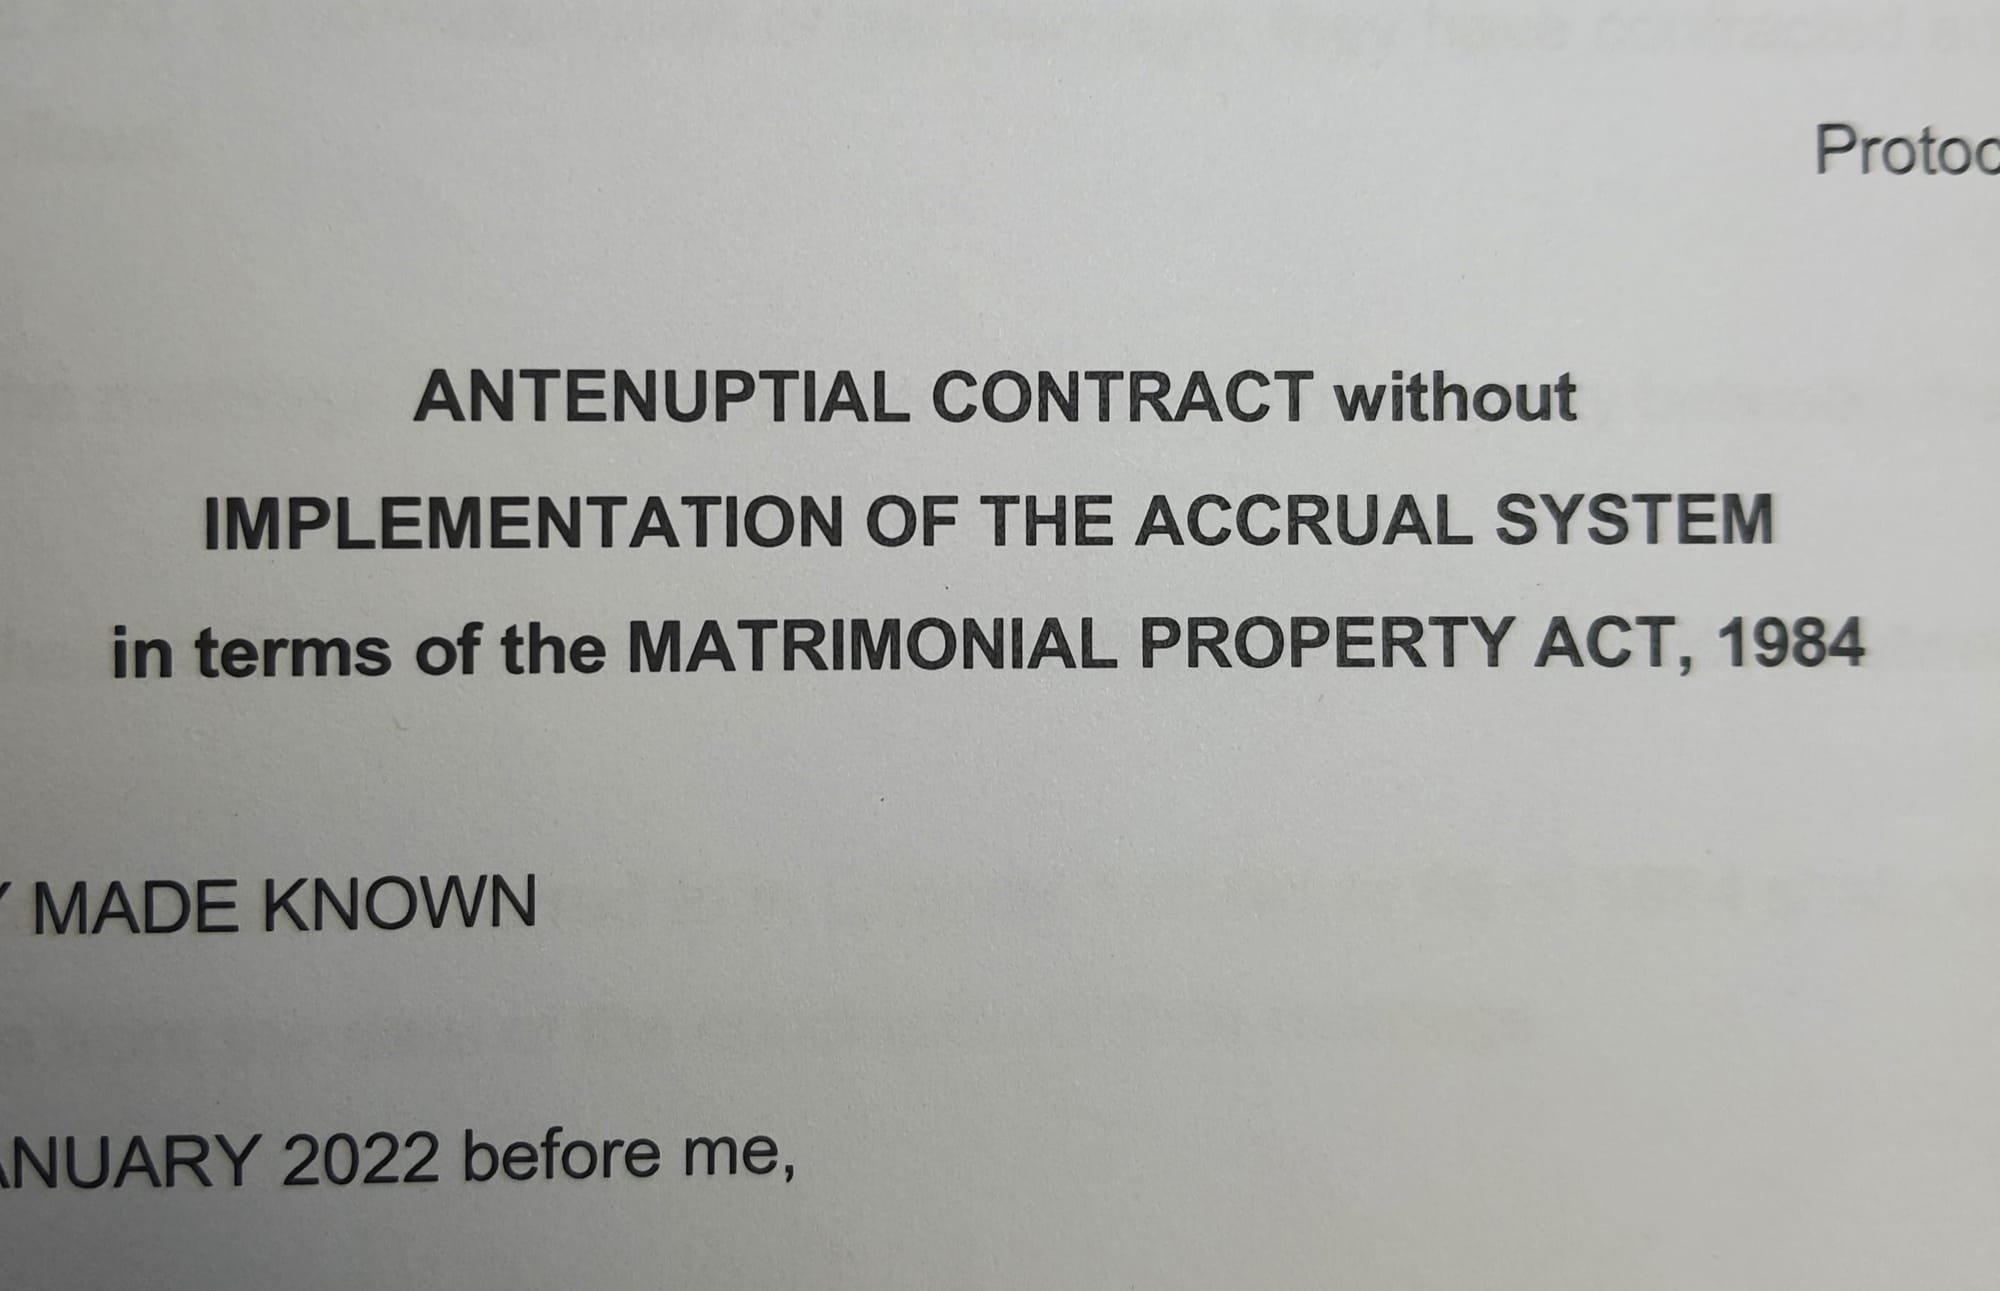 Atenuptial Contract without implementation of the accrual system.